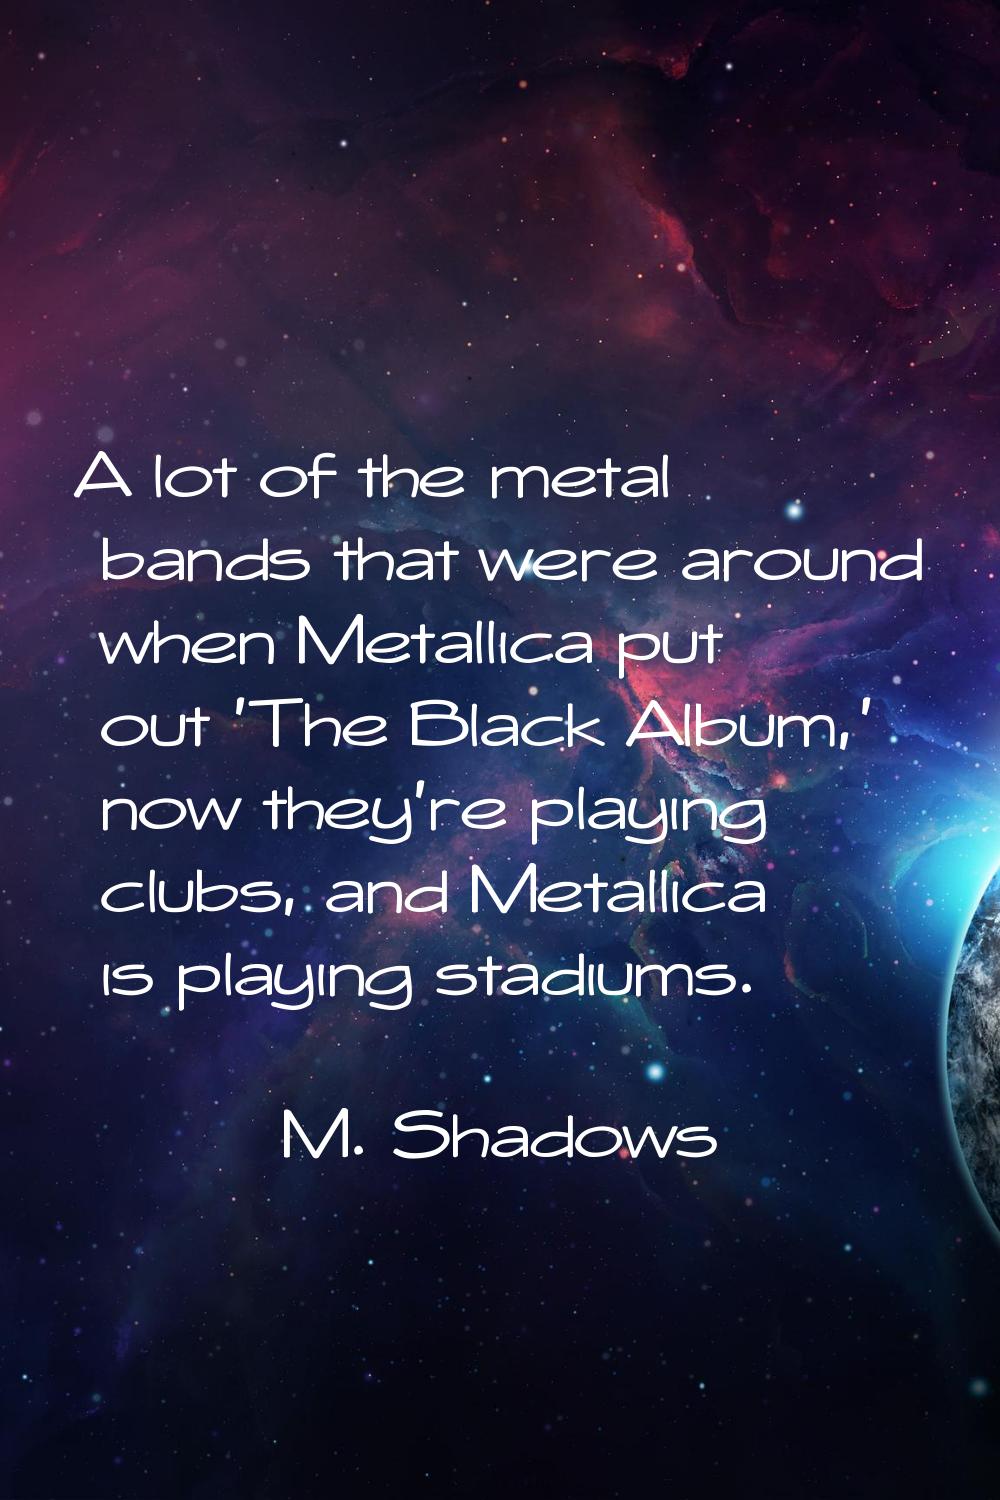 A lot of the metal bands that were around when Metallica put out 'The Black Album,' now they're pla